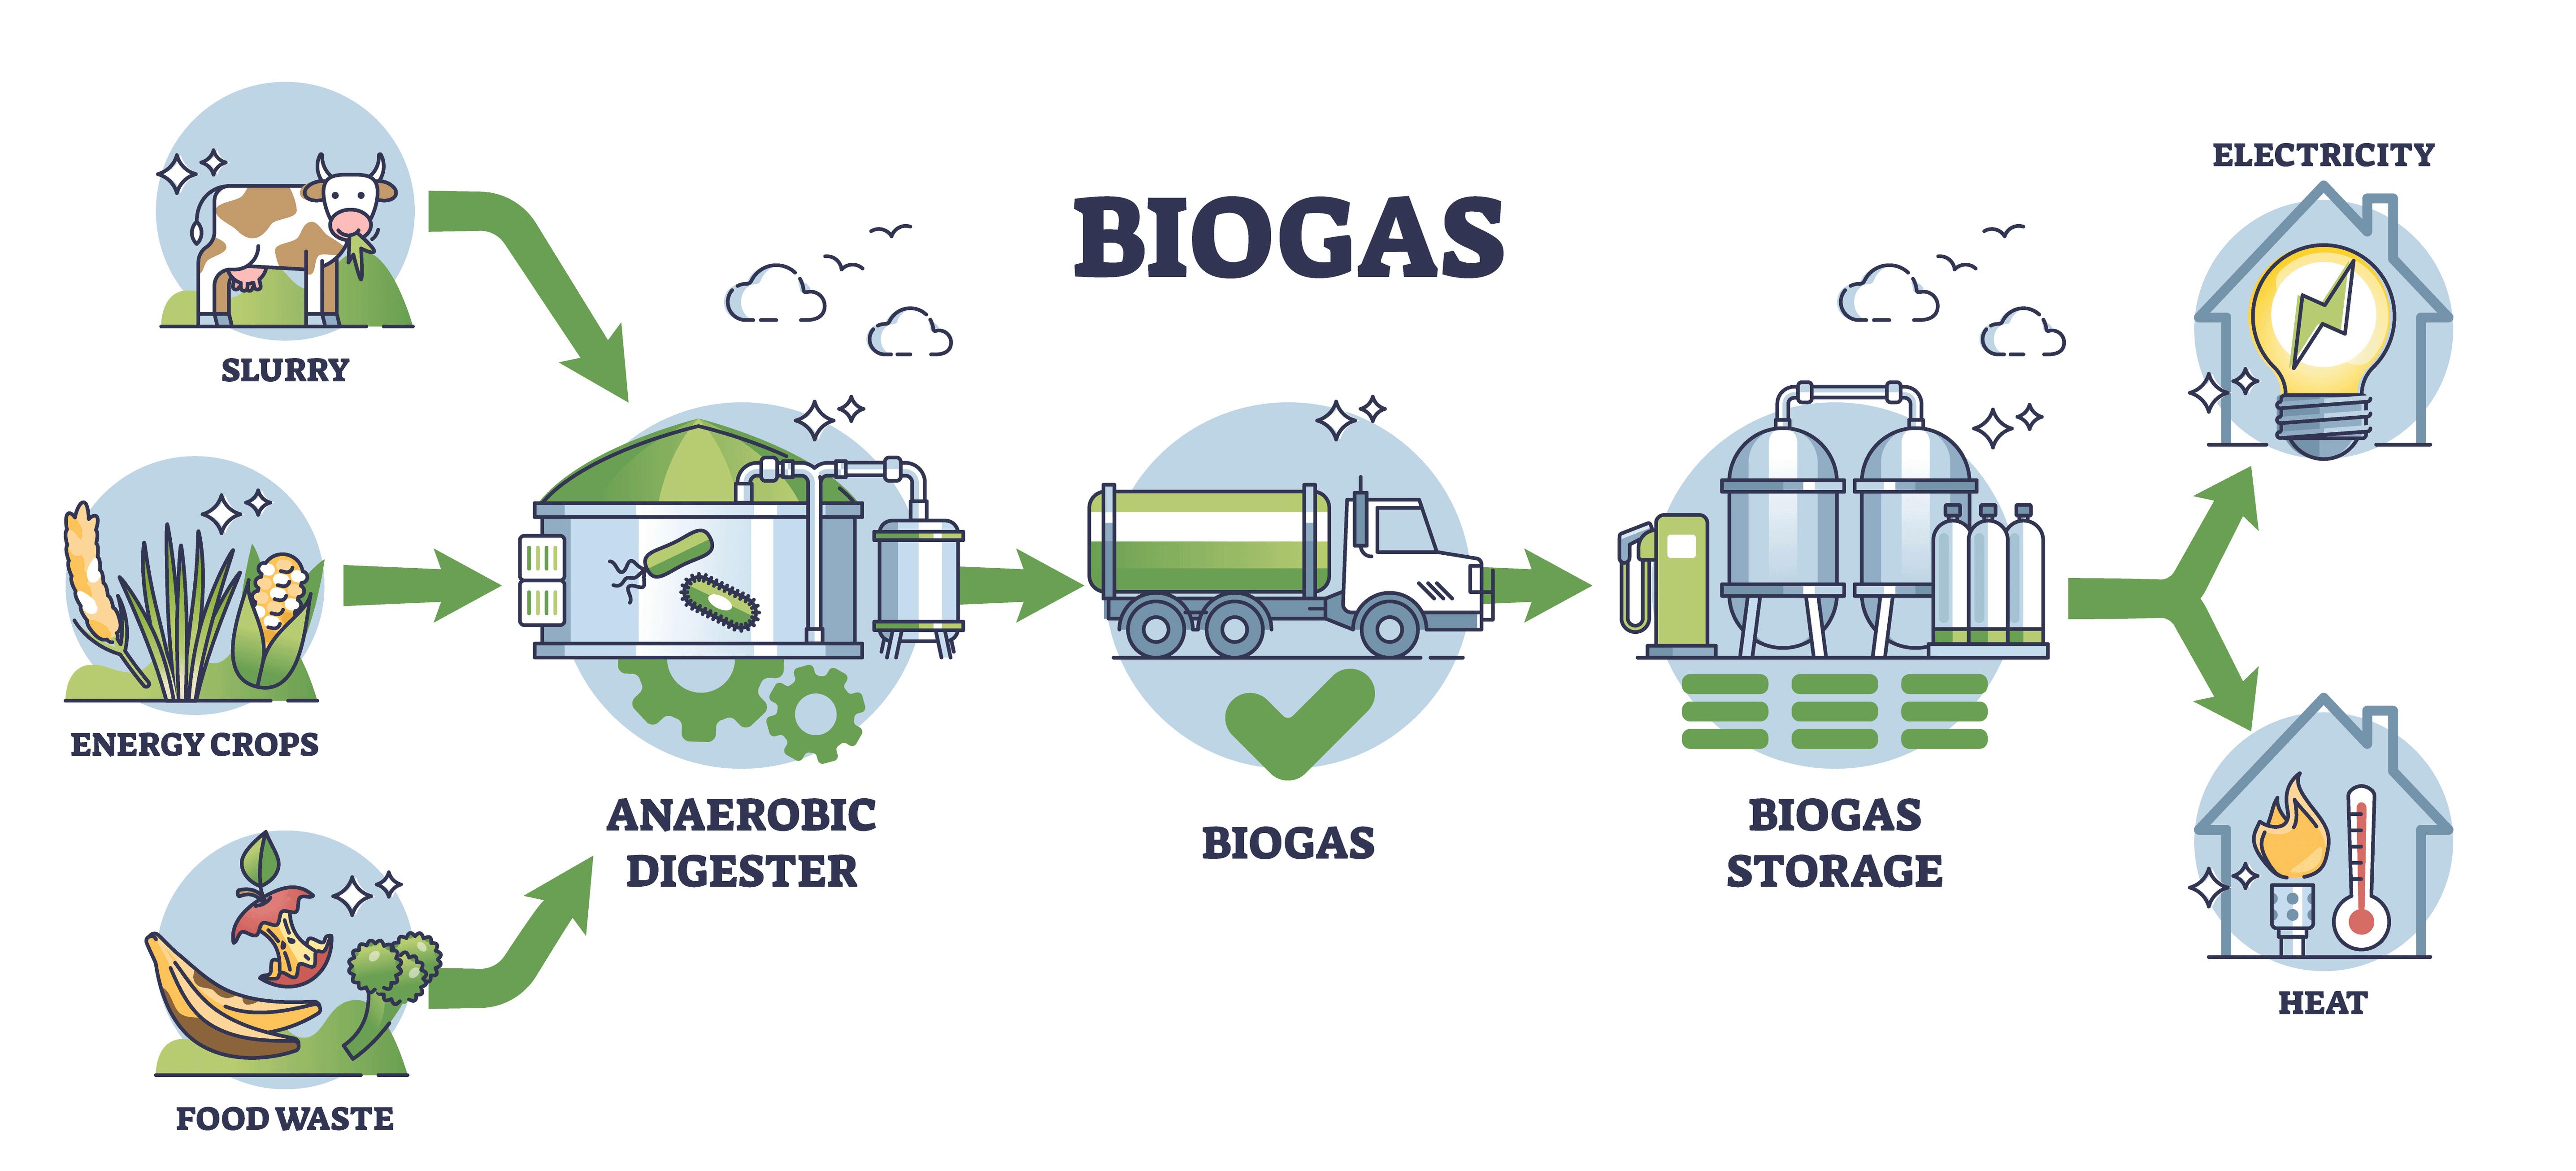 Biogas Station From organic matter to energy production